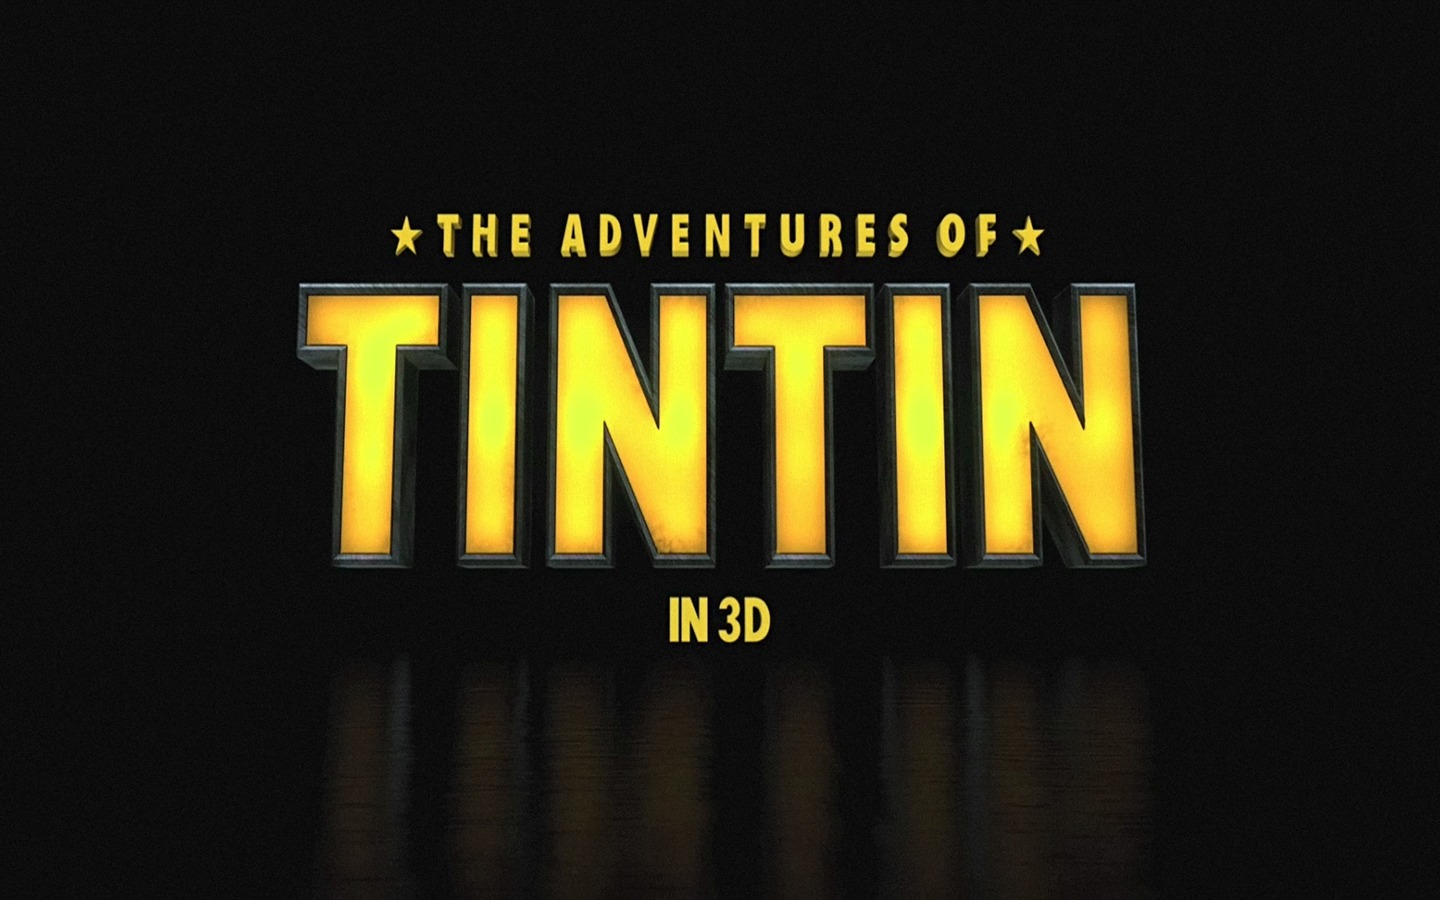 The Adventures of Tintin Tapety HD #14 - 1440x900